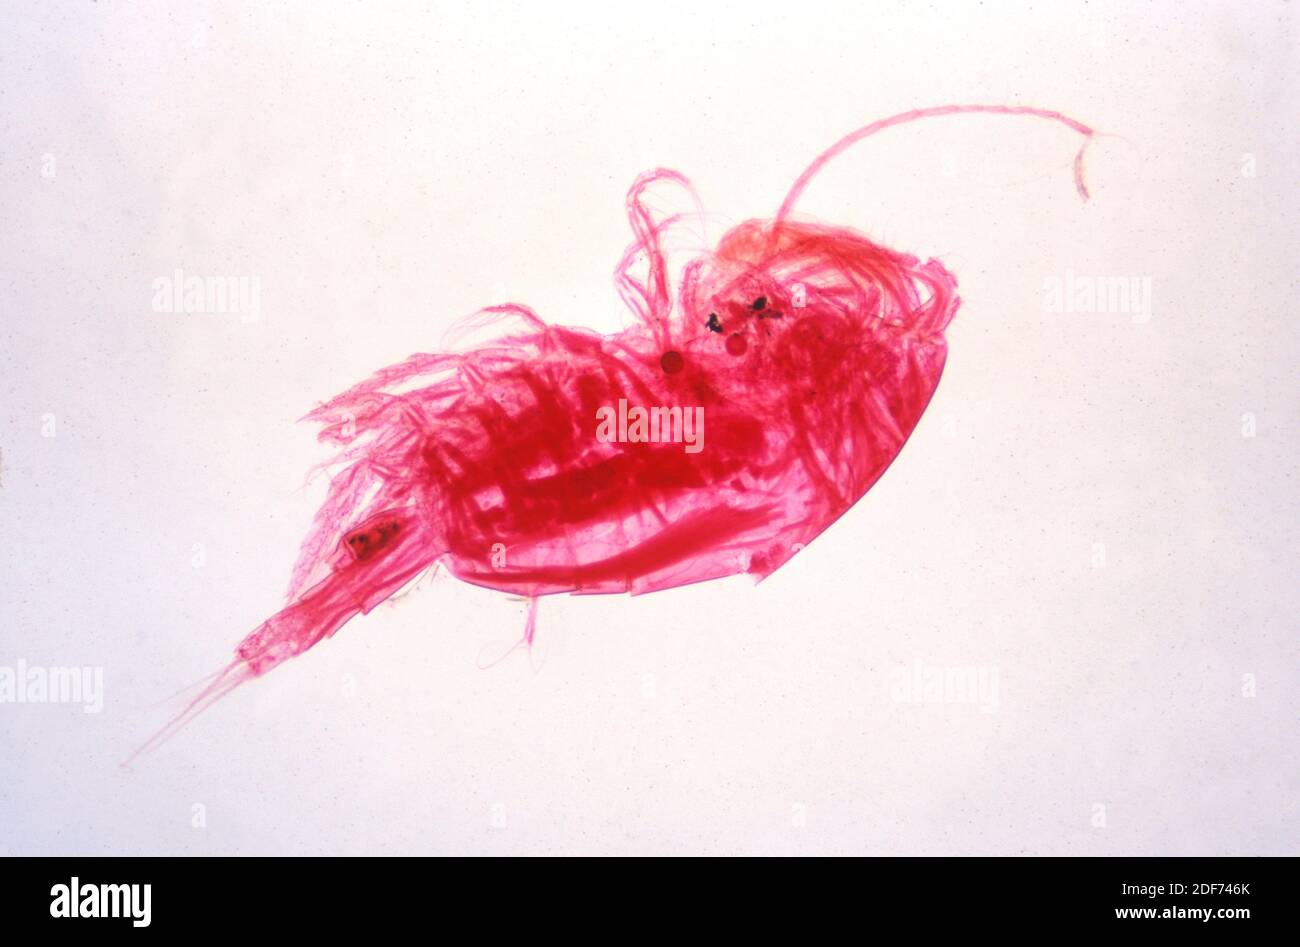 Cyclops sp. is a genus of freshwater crustacean. Microphotograph. Stock Photo